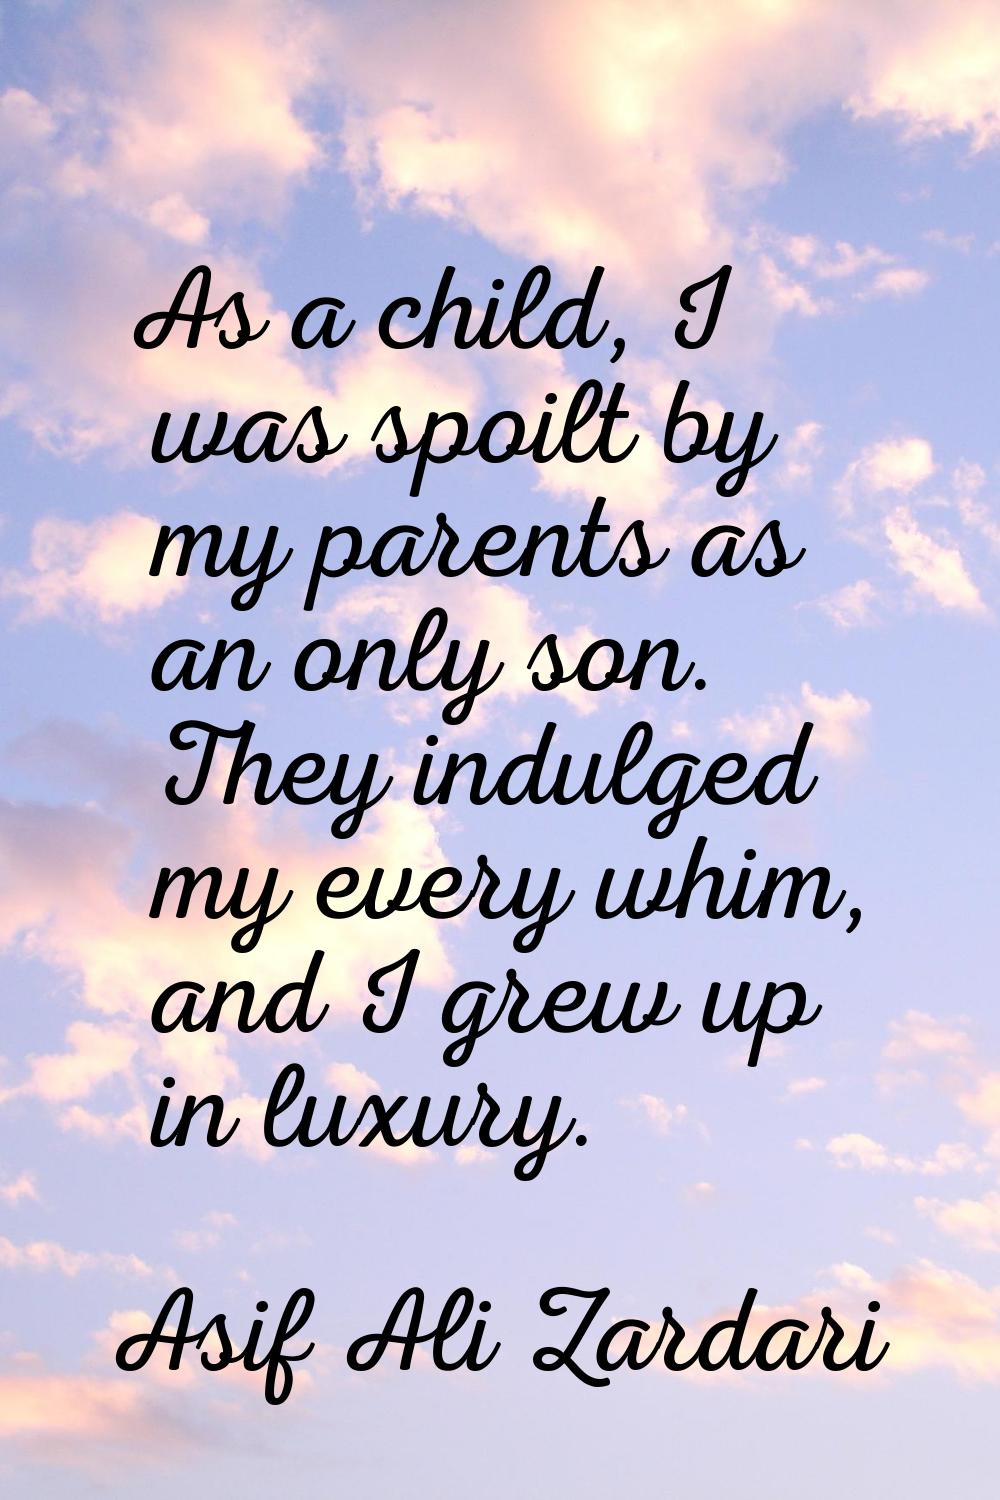 As a child, I was spoilt by my parents as an only son. They indulged my every whim, and I grew up i